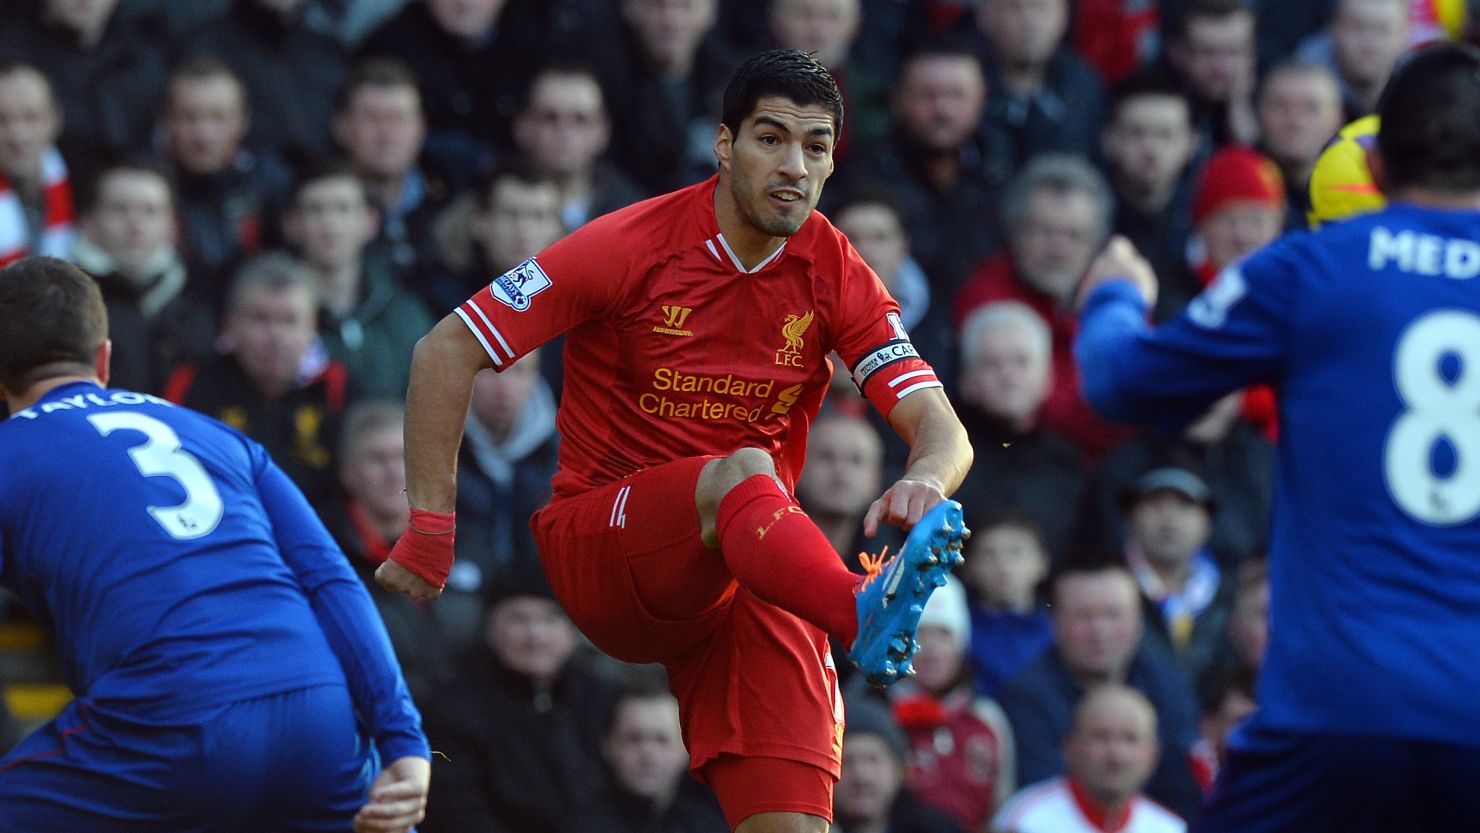 Luis Suarez continues to be the man of the moment in the Premier League, scoring two more goals Saturday. 